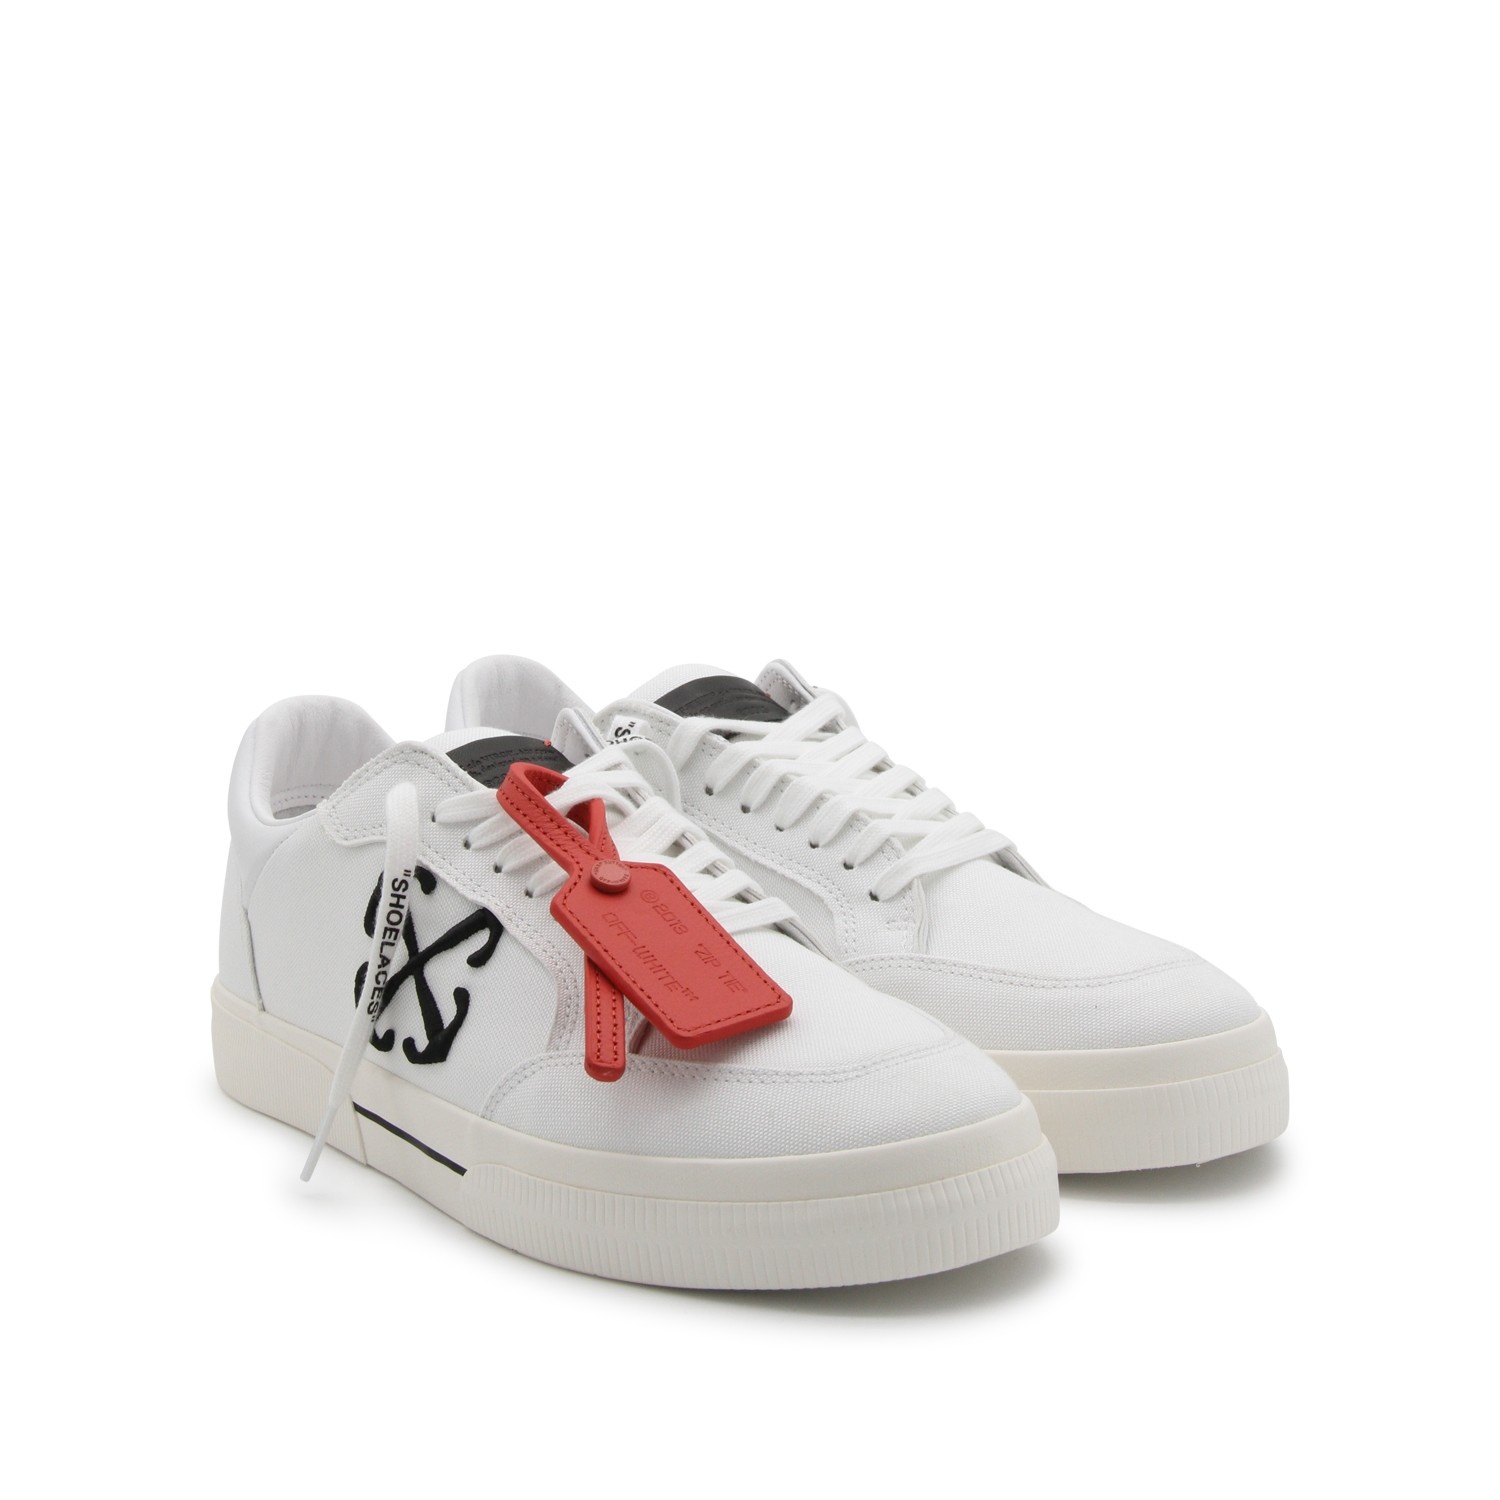 WHITE AND BLACK CANVAS VULCANIZED SNEAKERS - 2